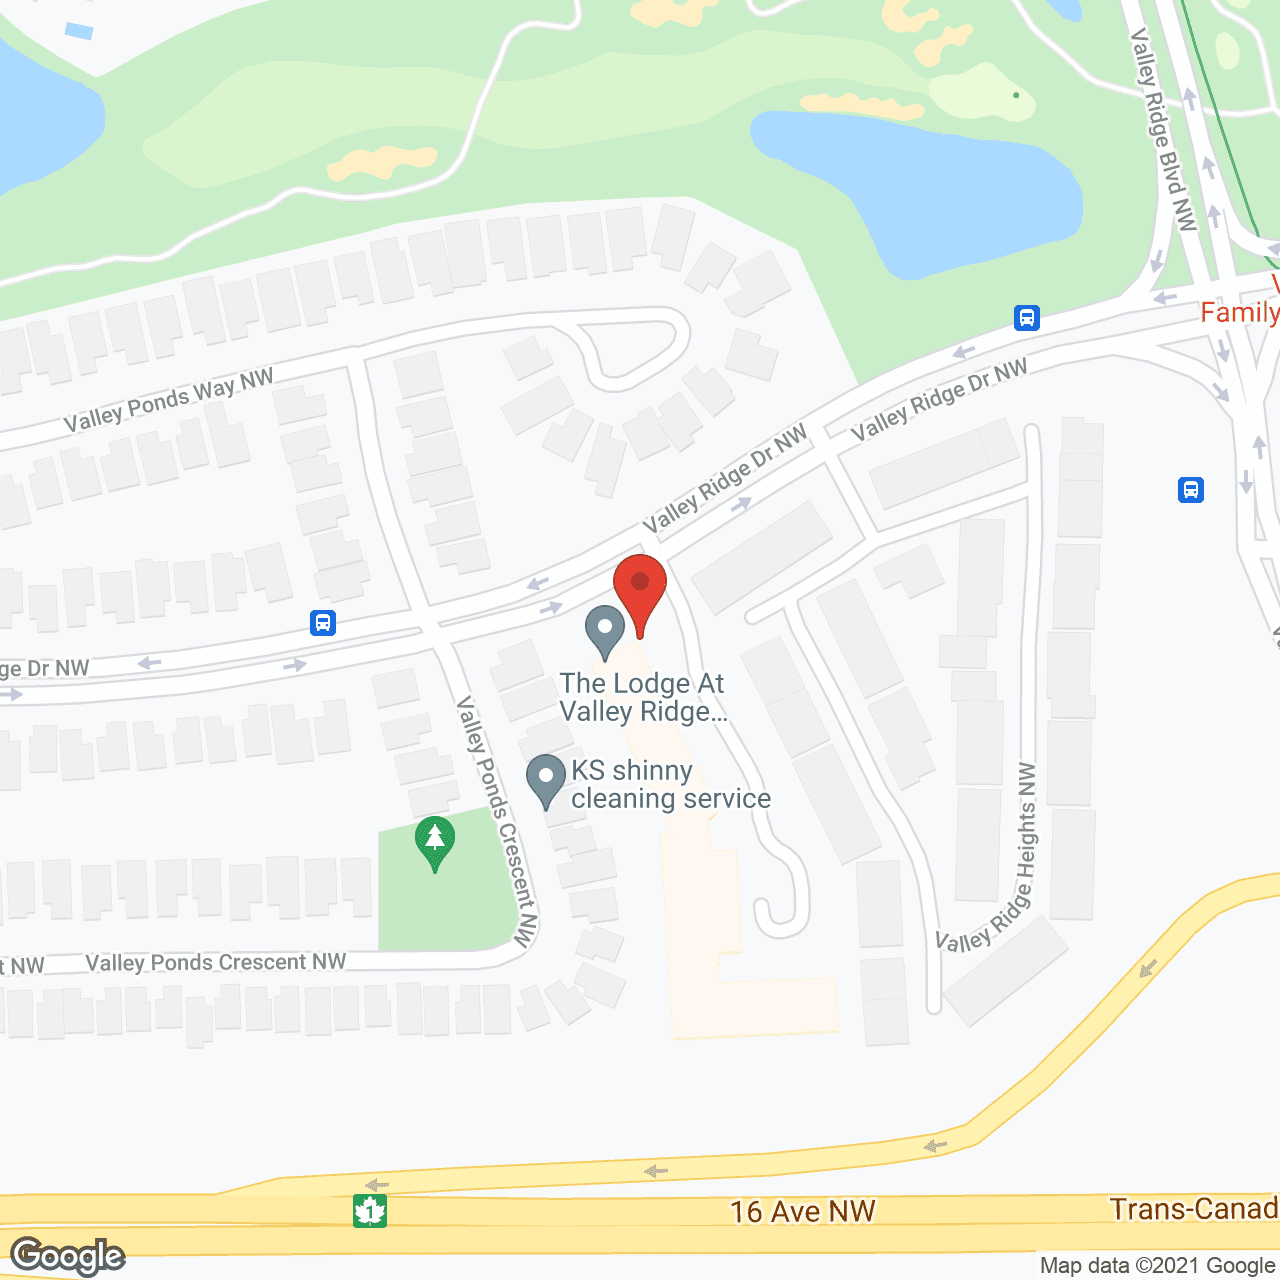 The Lodge at Valley Ridge in google map